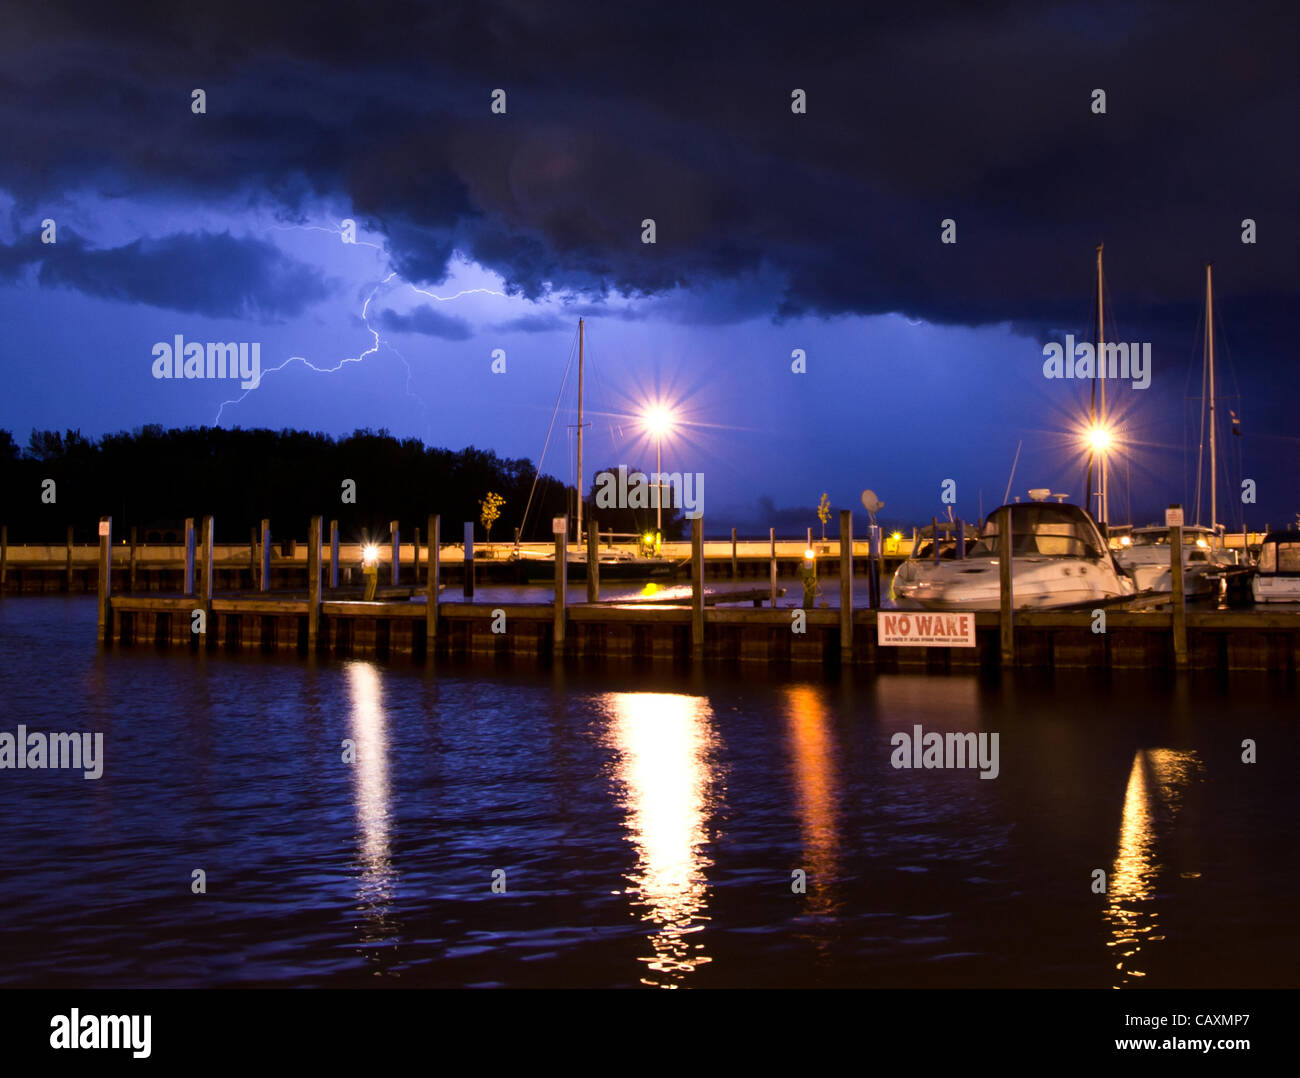 Windsor, Ontario, Canada. 04 May, 2012. A strong storm moving across Michigan and Southwestern Ontario as seen from Riverside Marina in Windsor, Ontario early Friday Morning. Stock Photo